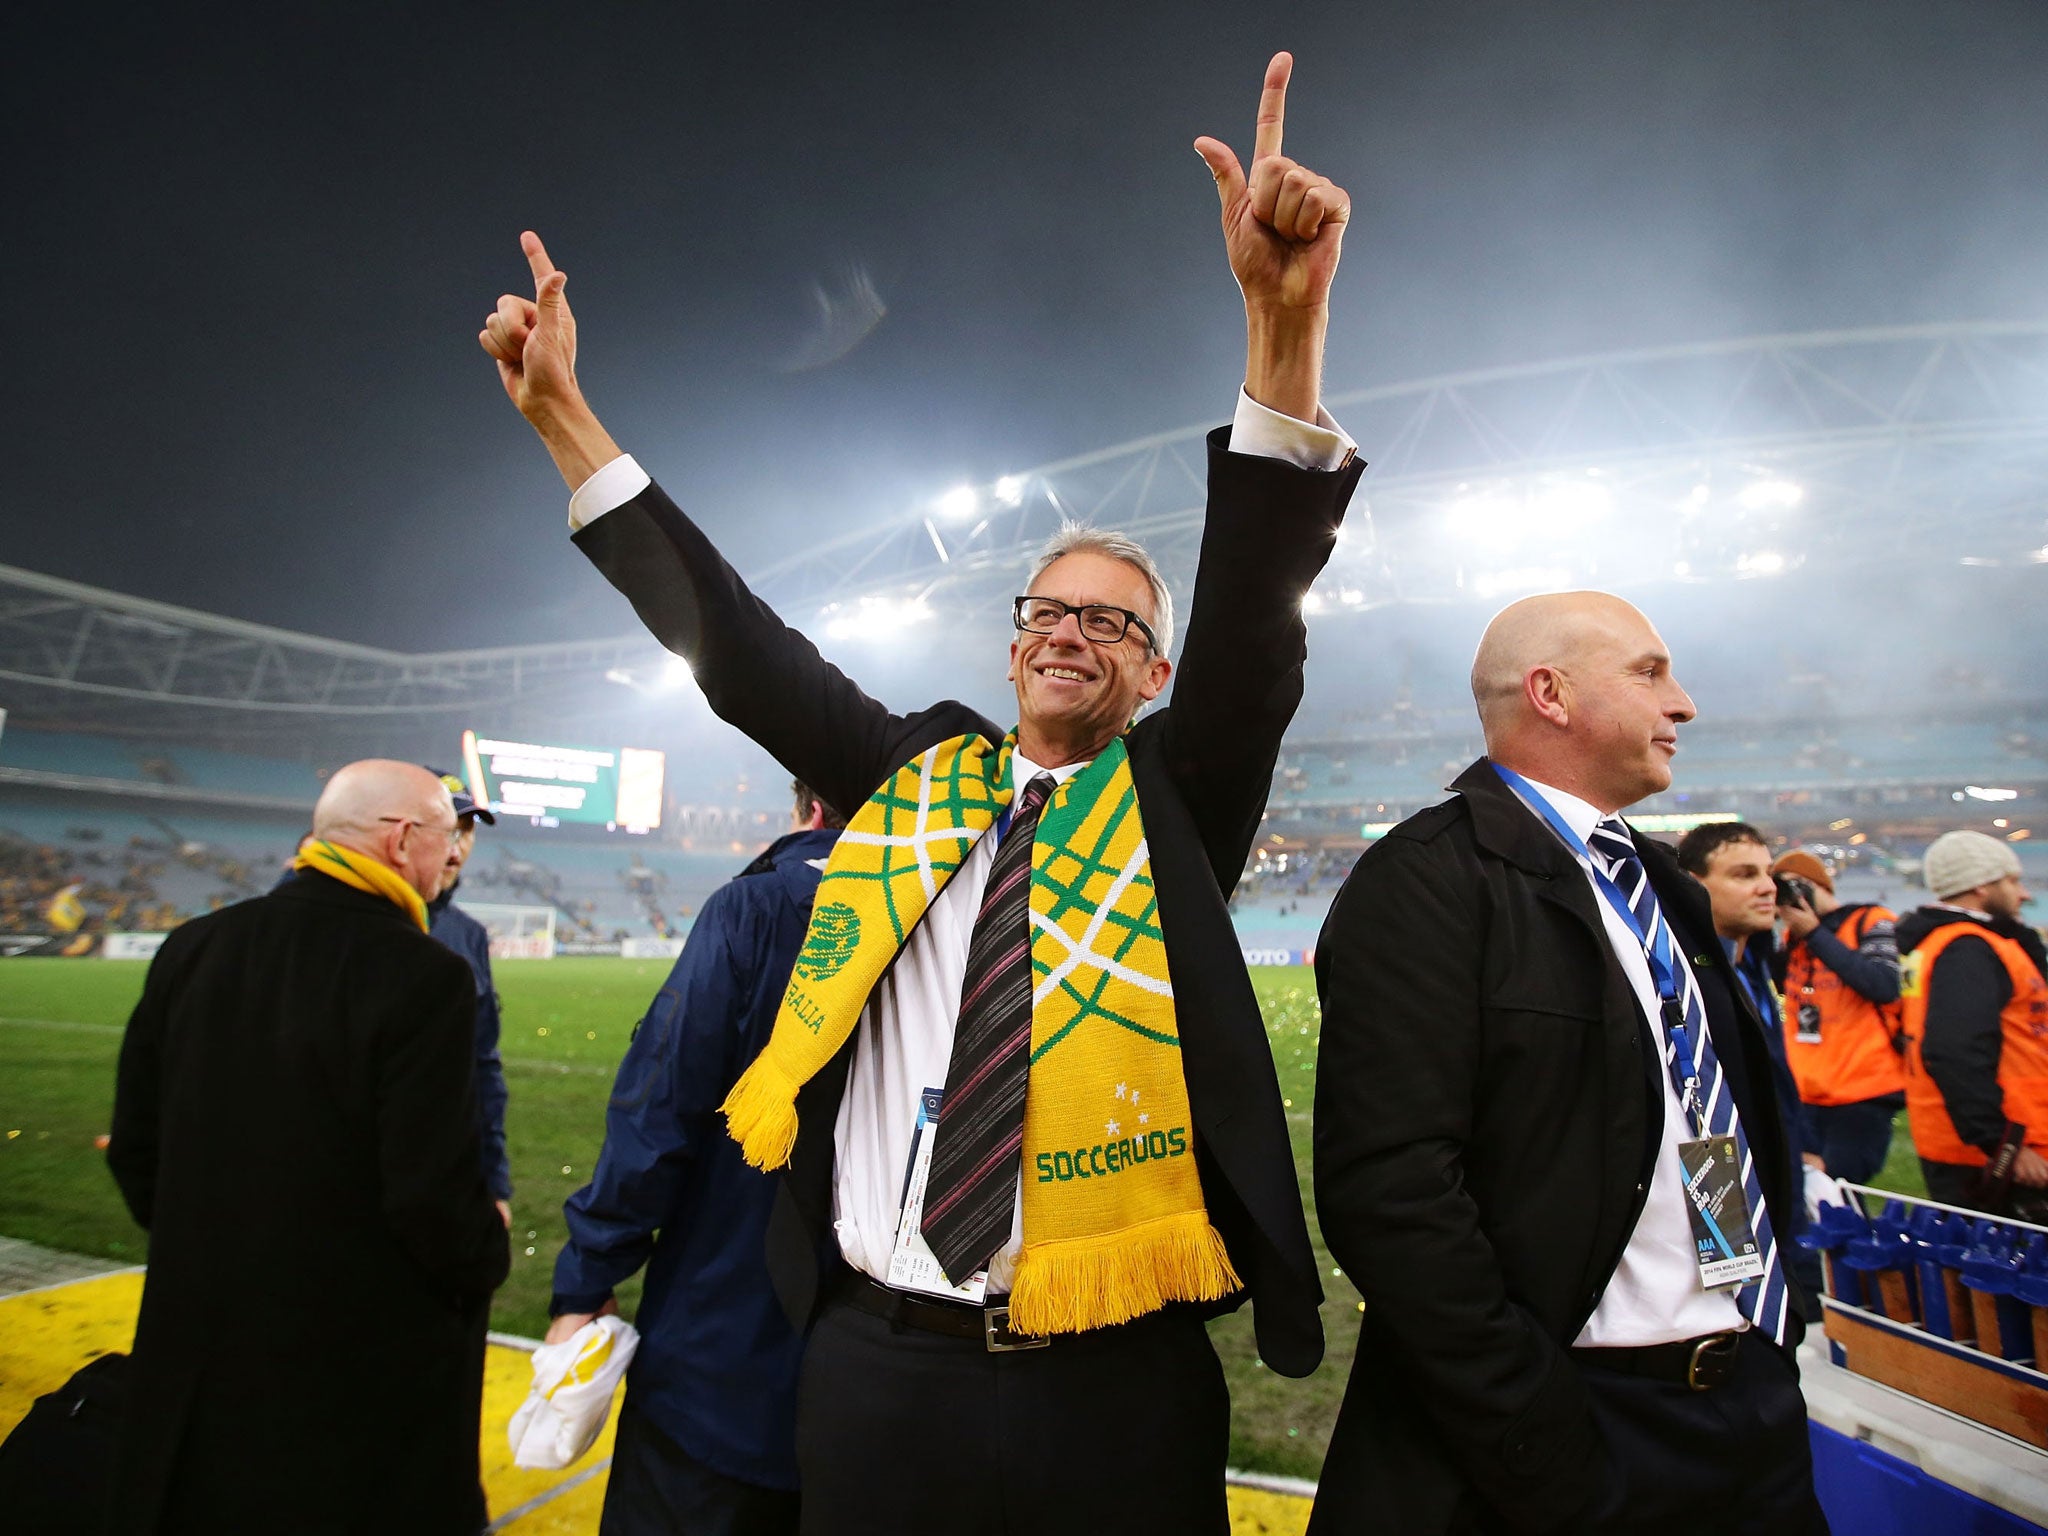 File: The FFA's David Gallop celebrates and waves to fans after the Socceroos victory during the FIFA 2014 World Cup Asian Qualifier on 18 June, 2013